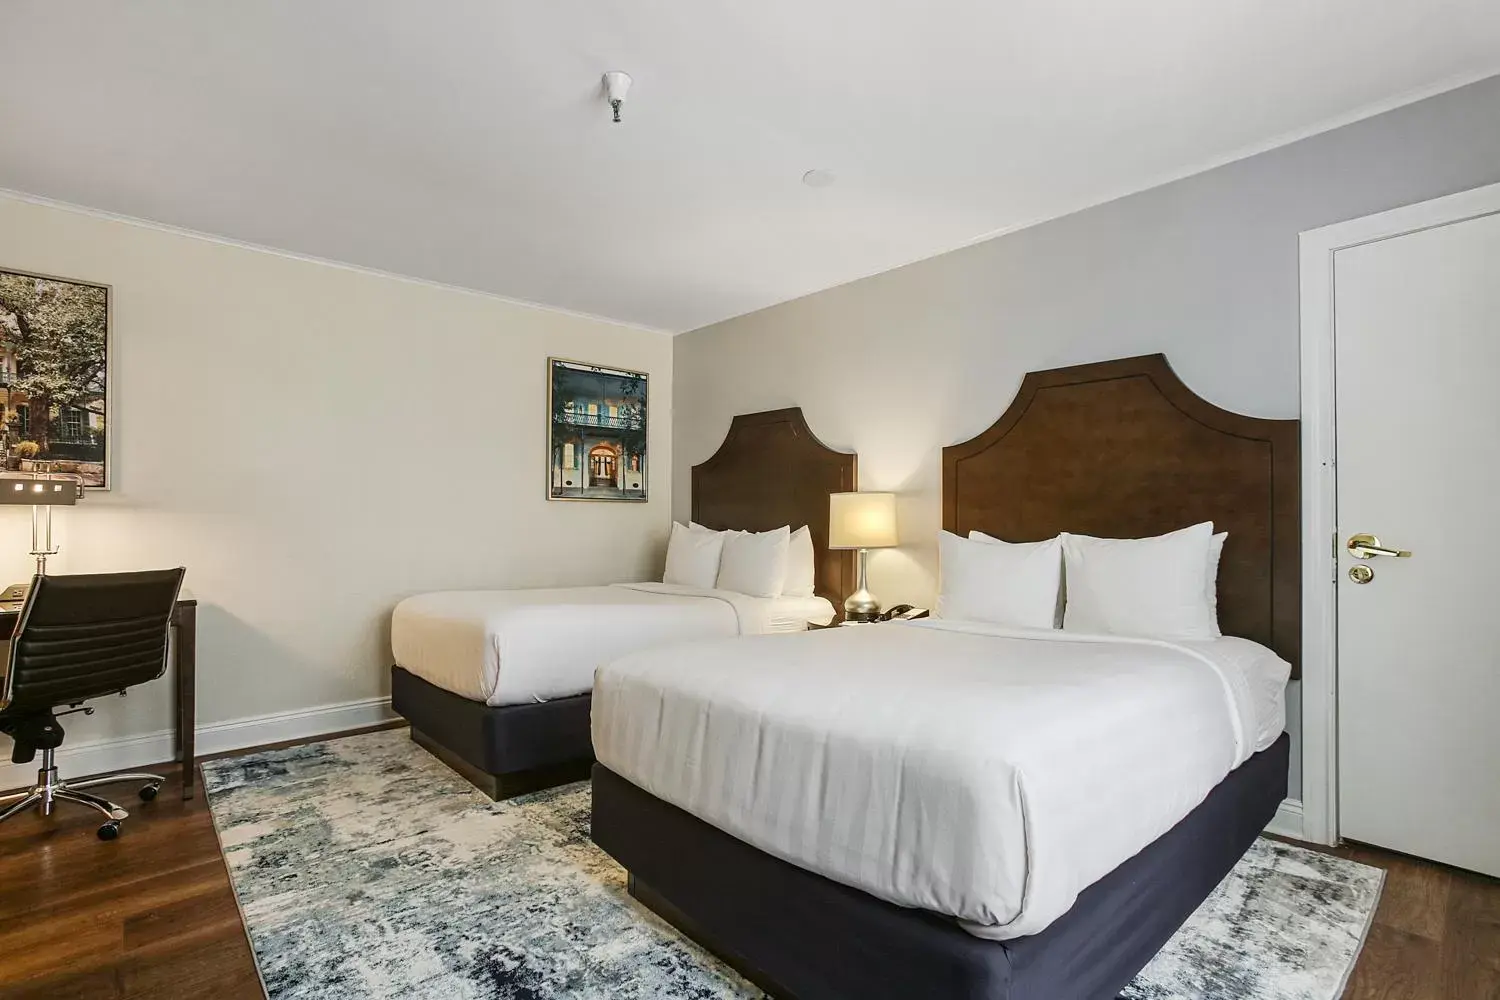 Property building, Bed in St Charles Inn, Superior Hotel